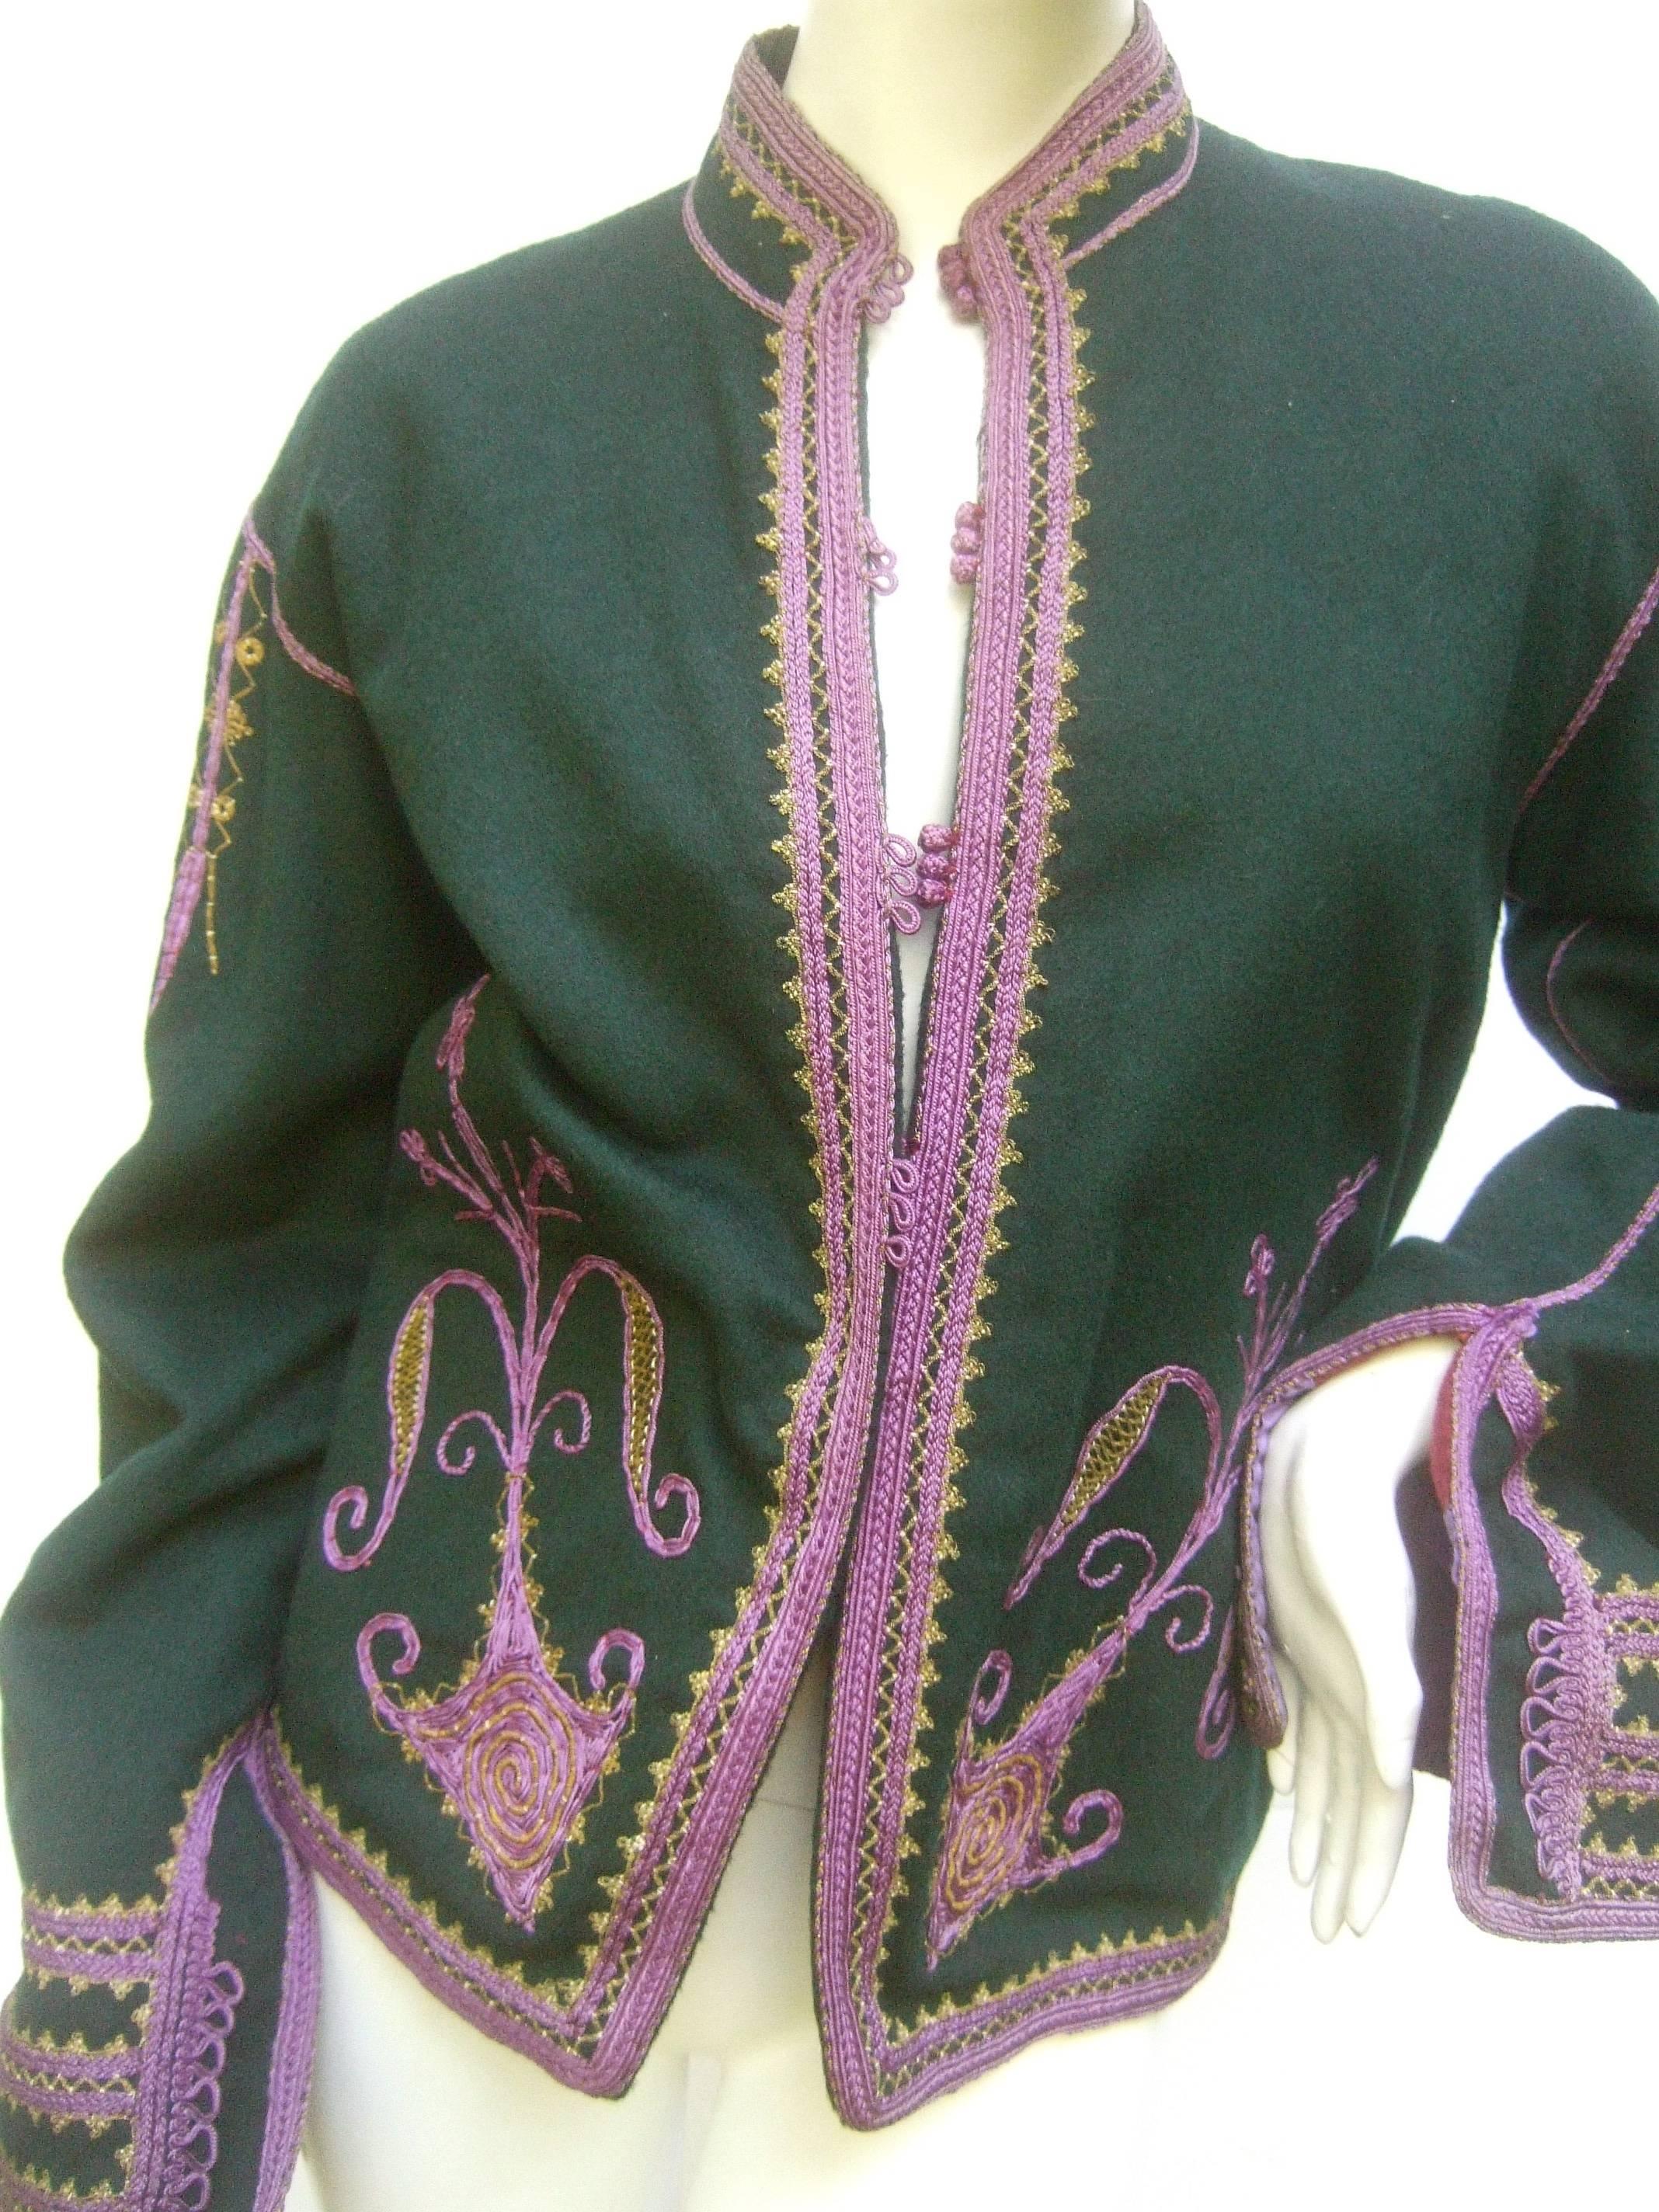 Women's Exotic Embroidered Green Wool Jacket c 1970s For Sale